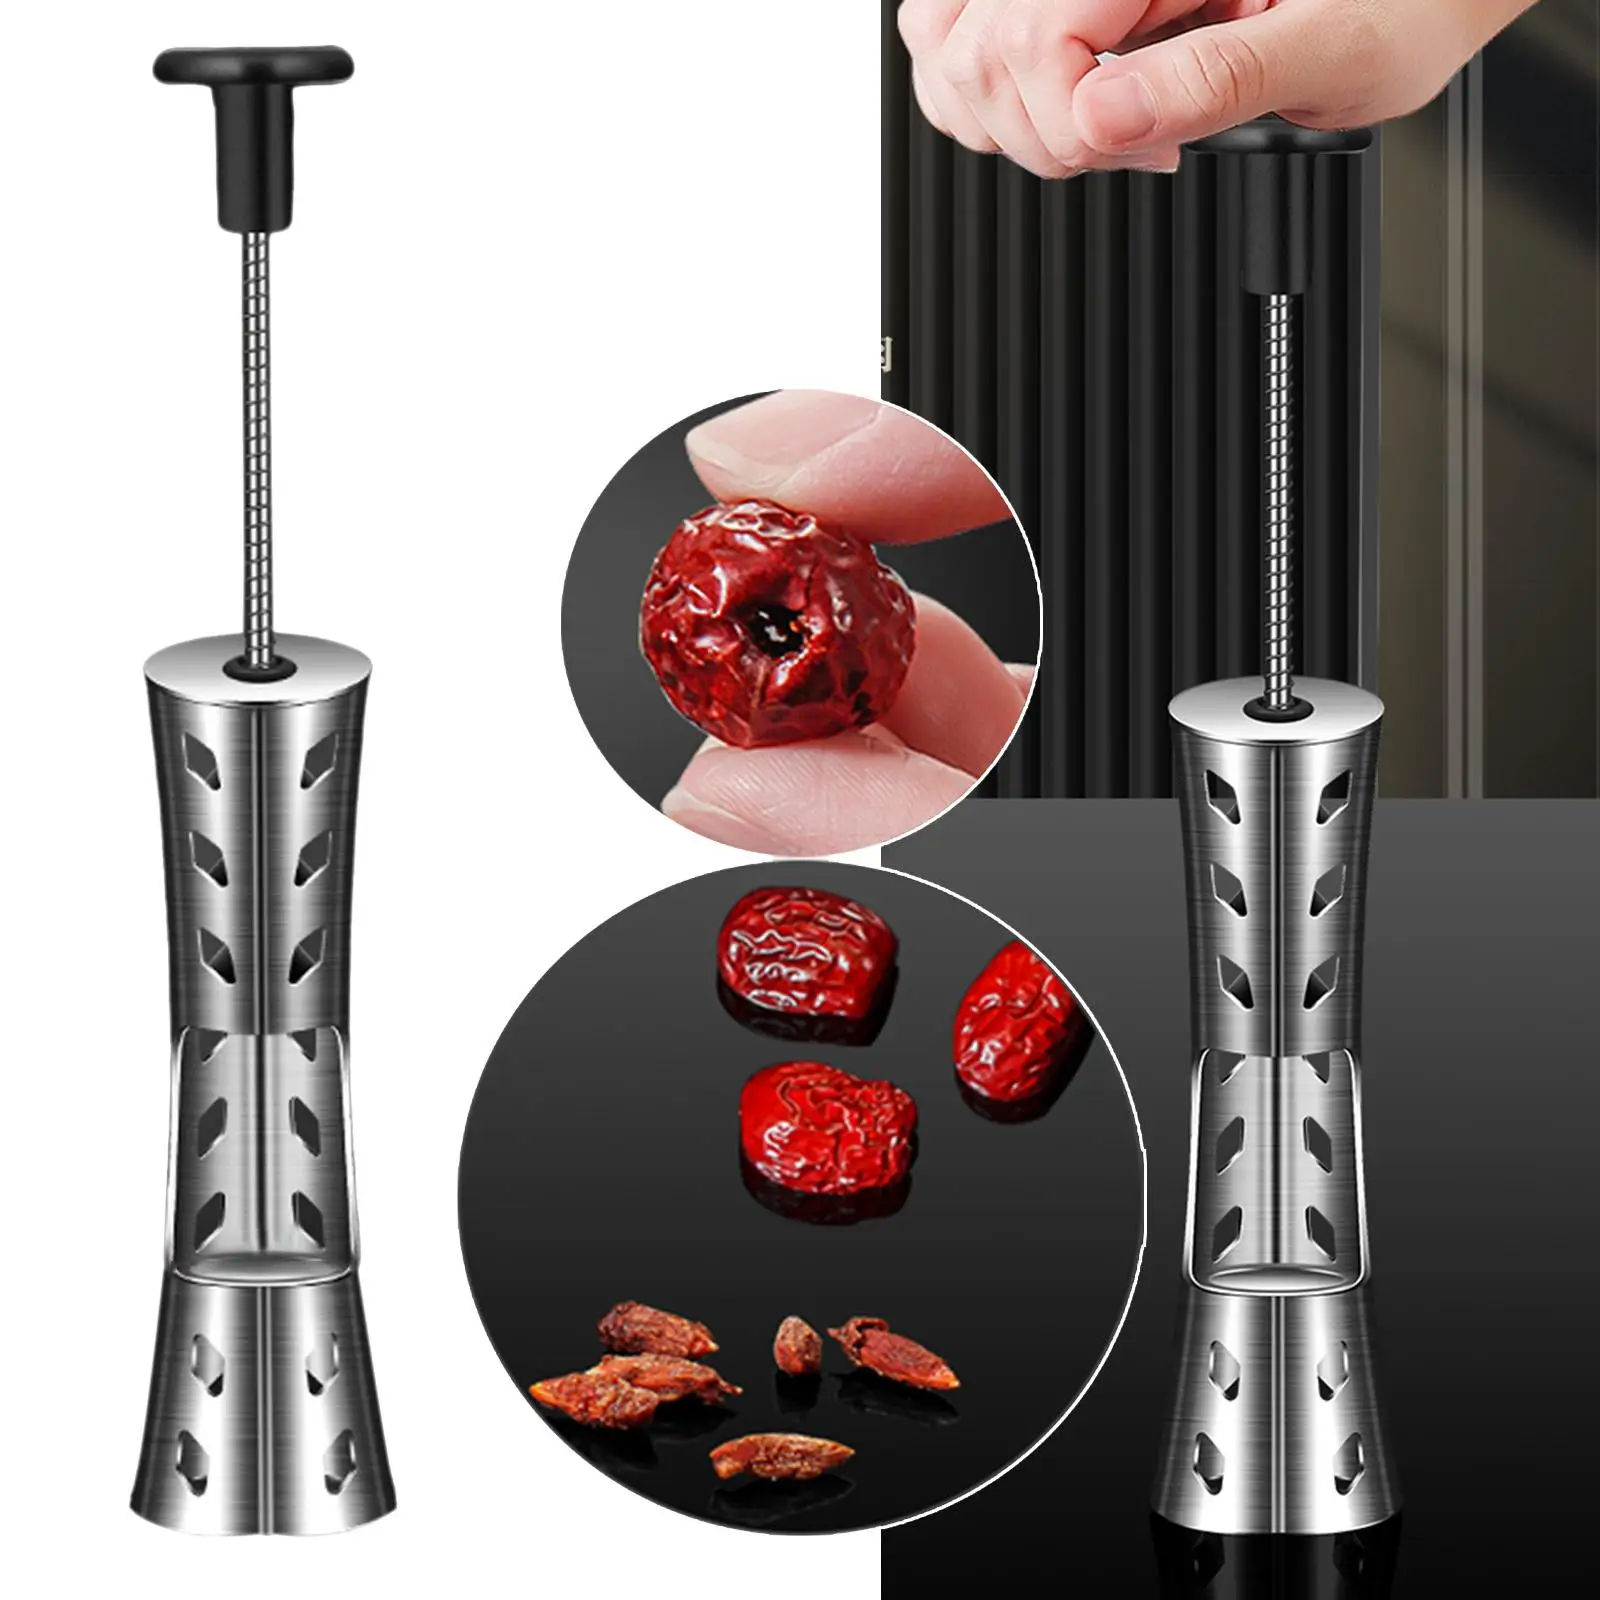 Red Dates Jujube Corer Kitchen Home for Jujube Fruit & Vegetable Tools